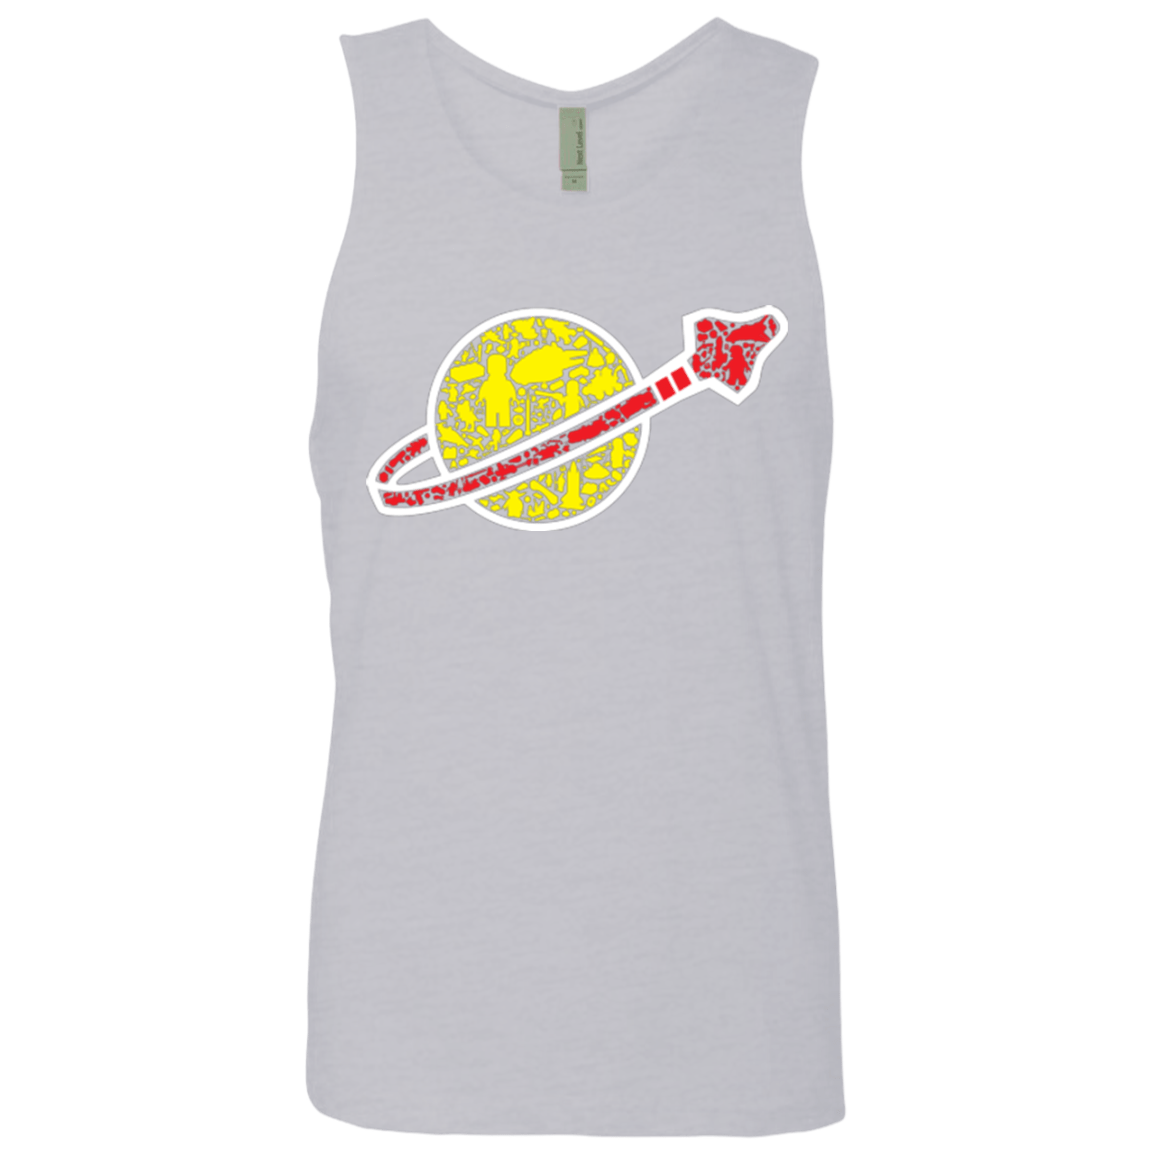 T-Shirts Heather Grey / Small Building in Space Men's Premium Tank Top